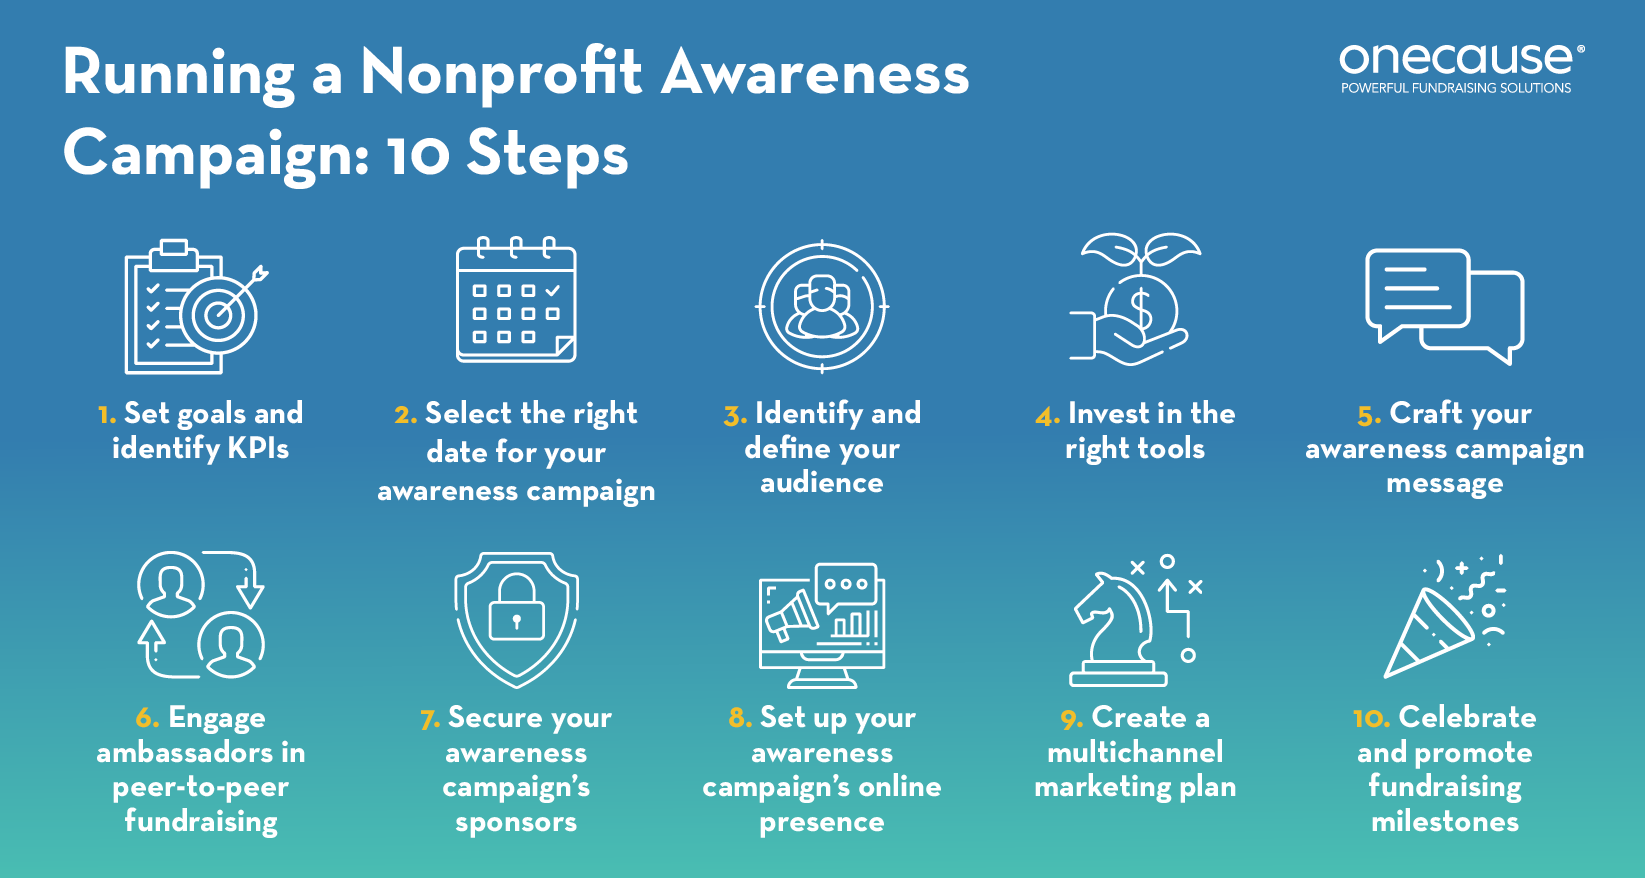 The 5 Steps You Need for Strong Nonprofit Communication - Getting Attention